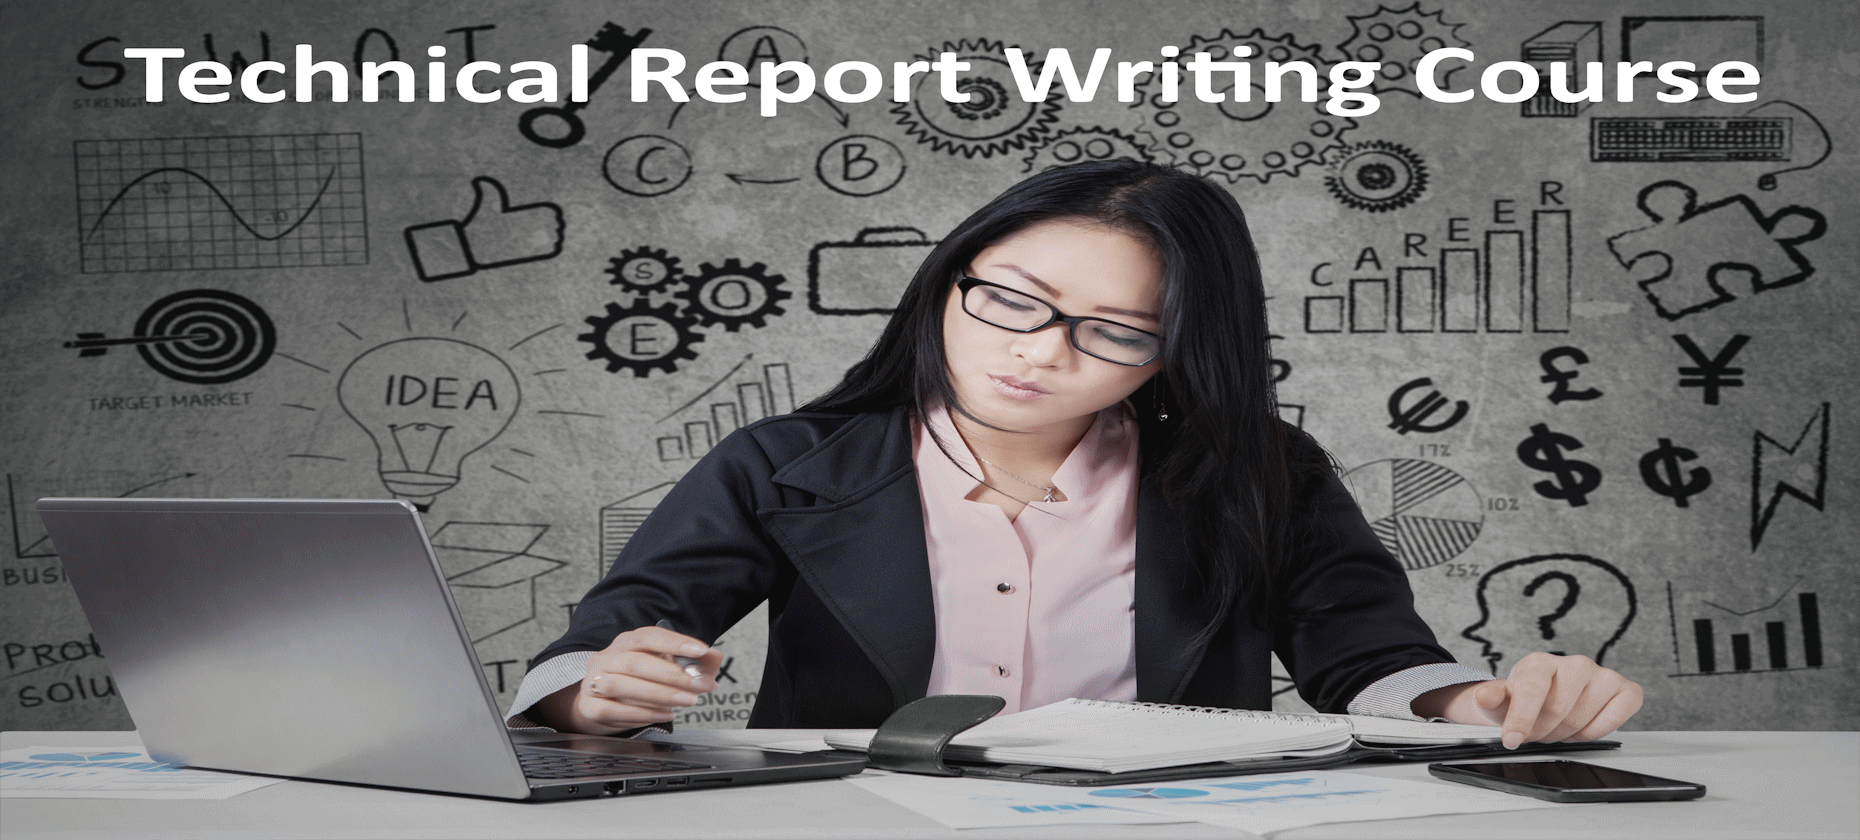 Technical Report Writing Course (£695 total for this 1-day course for a group of 4-15 people)